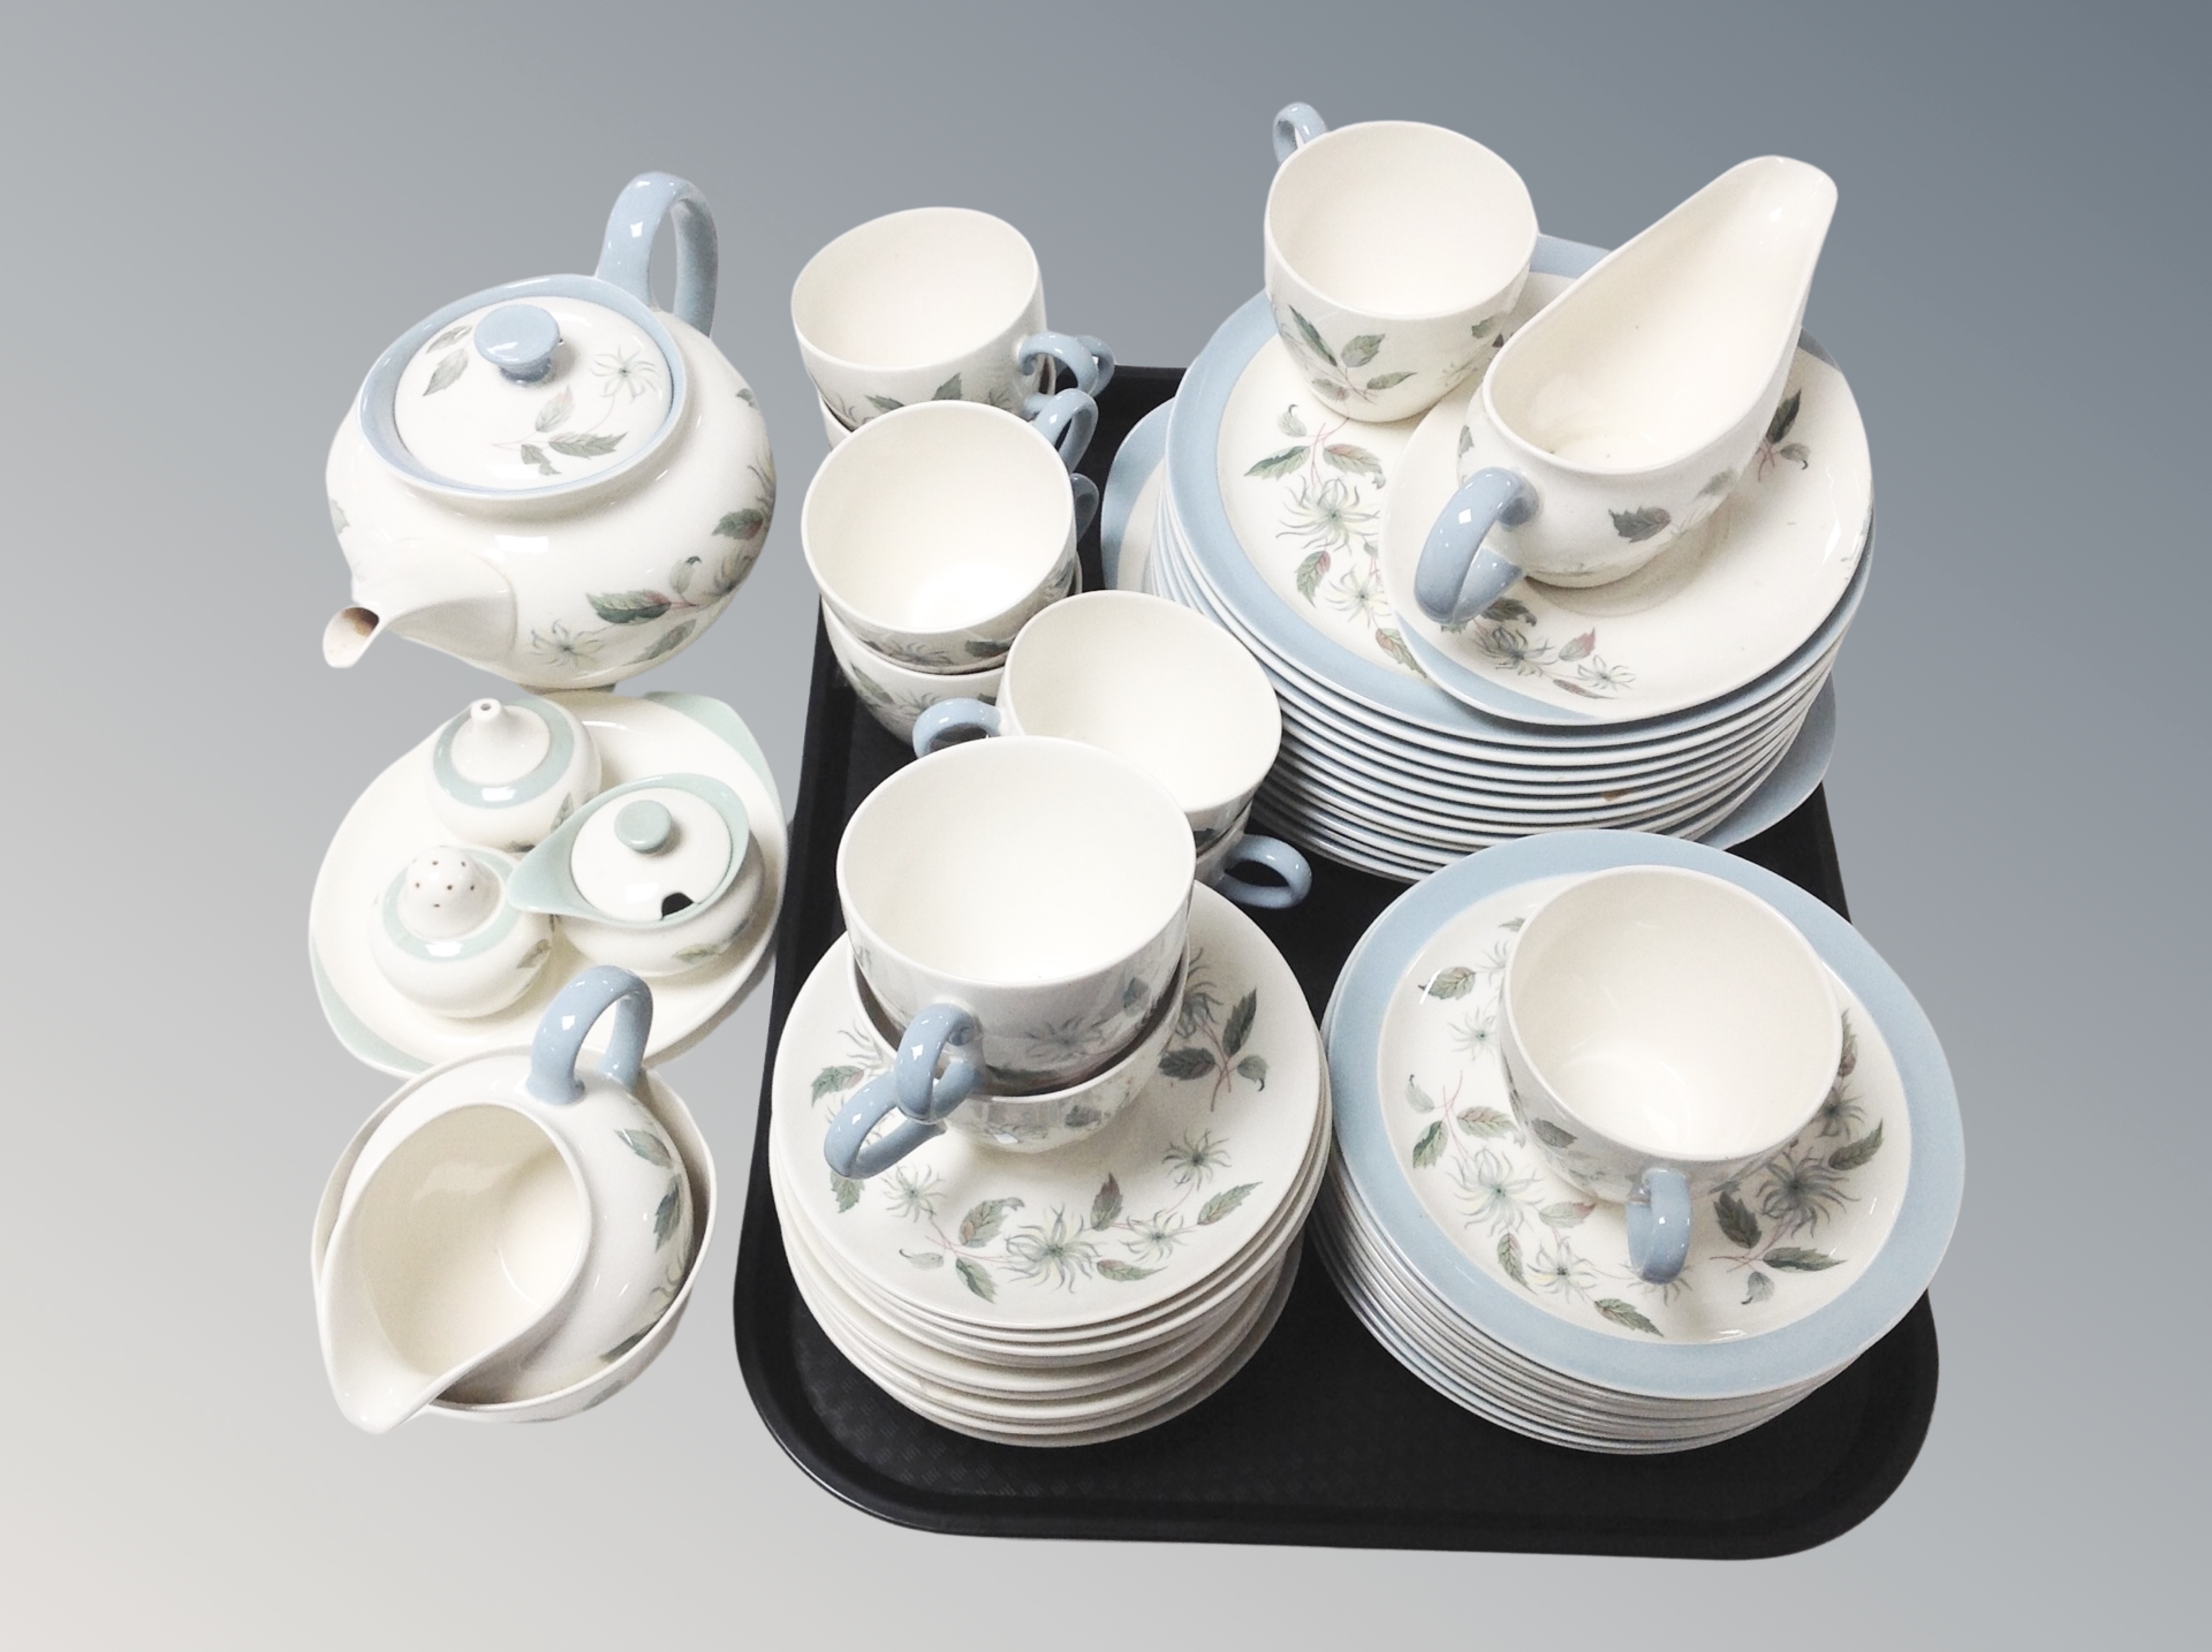 Approximately fifty five pieces of Wedgwood Barlaston Penshurst tea and dinner china